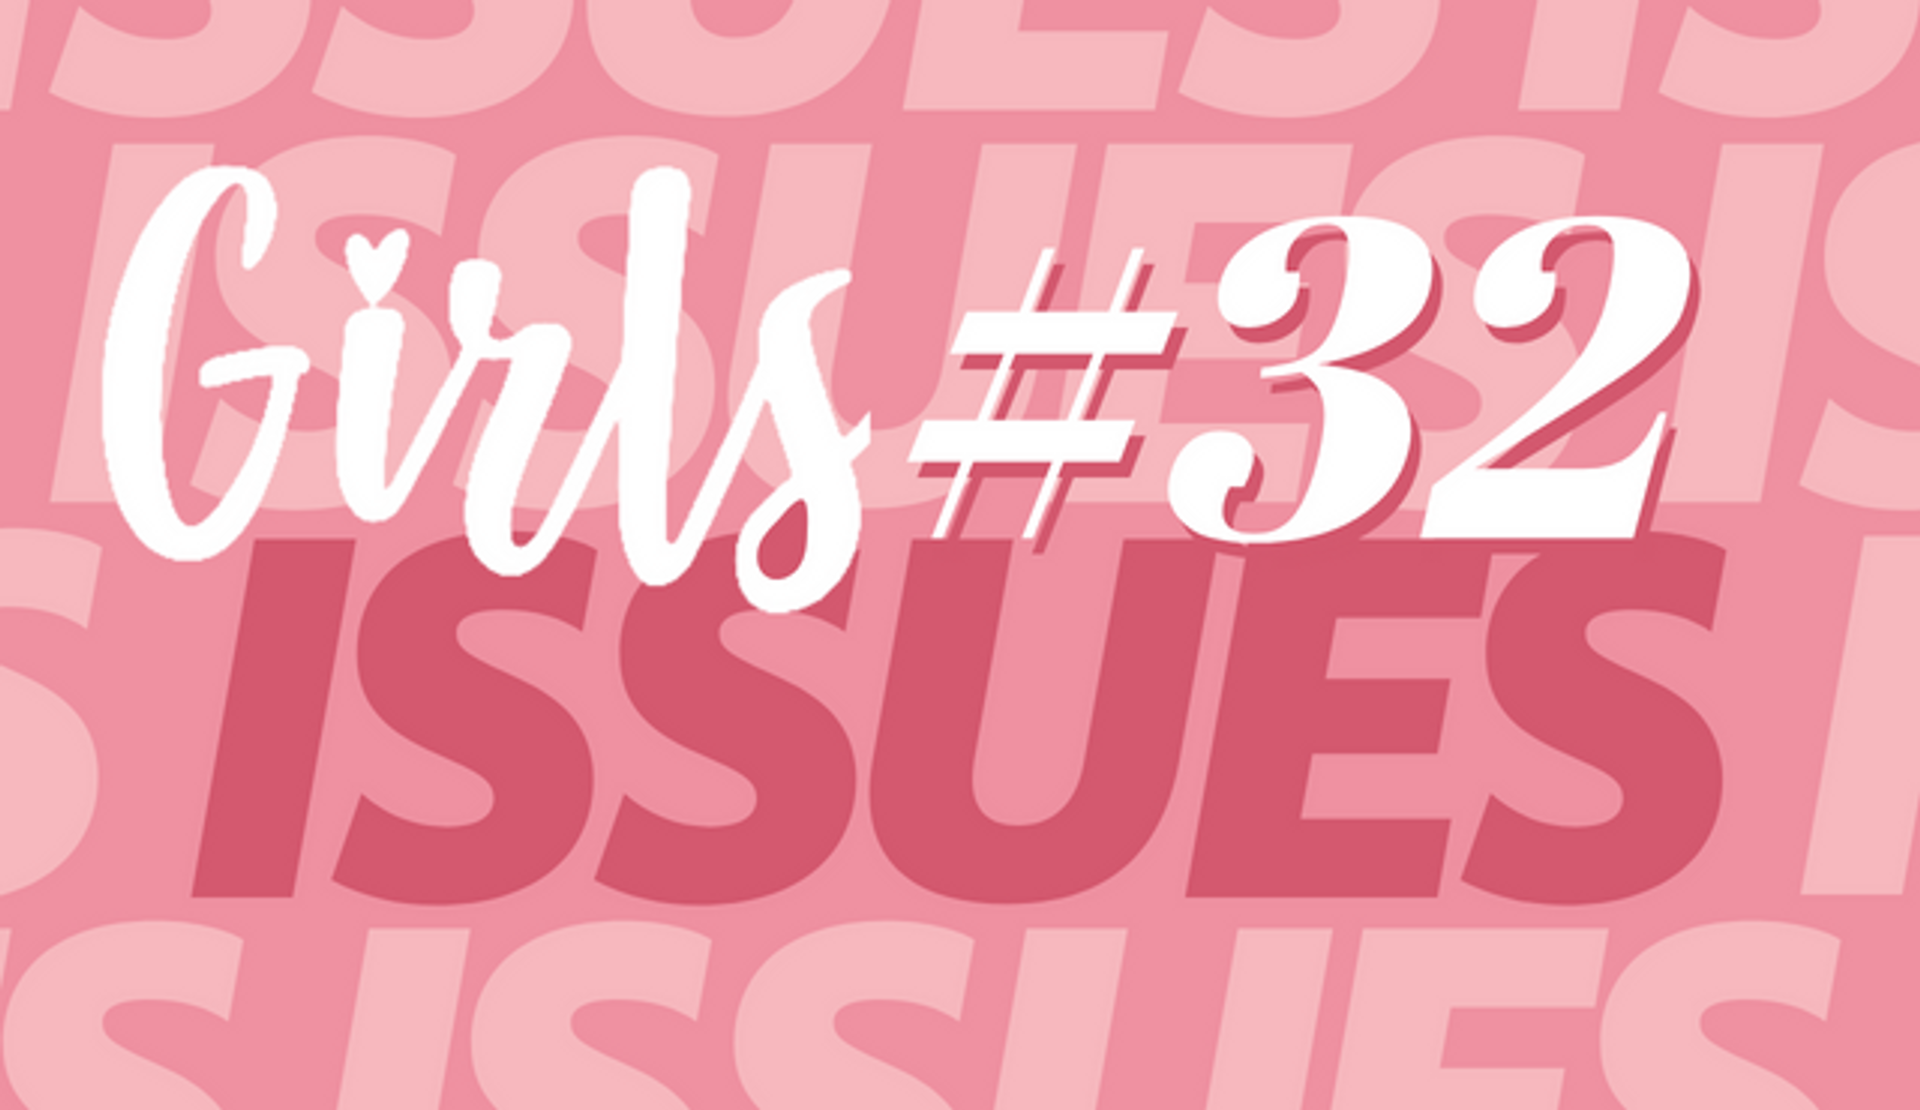 girls-issues-32